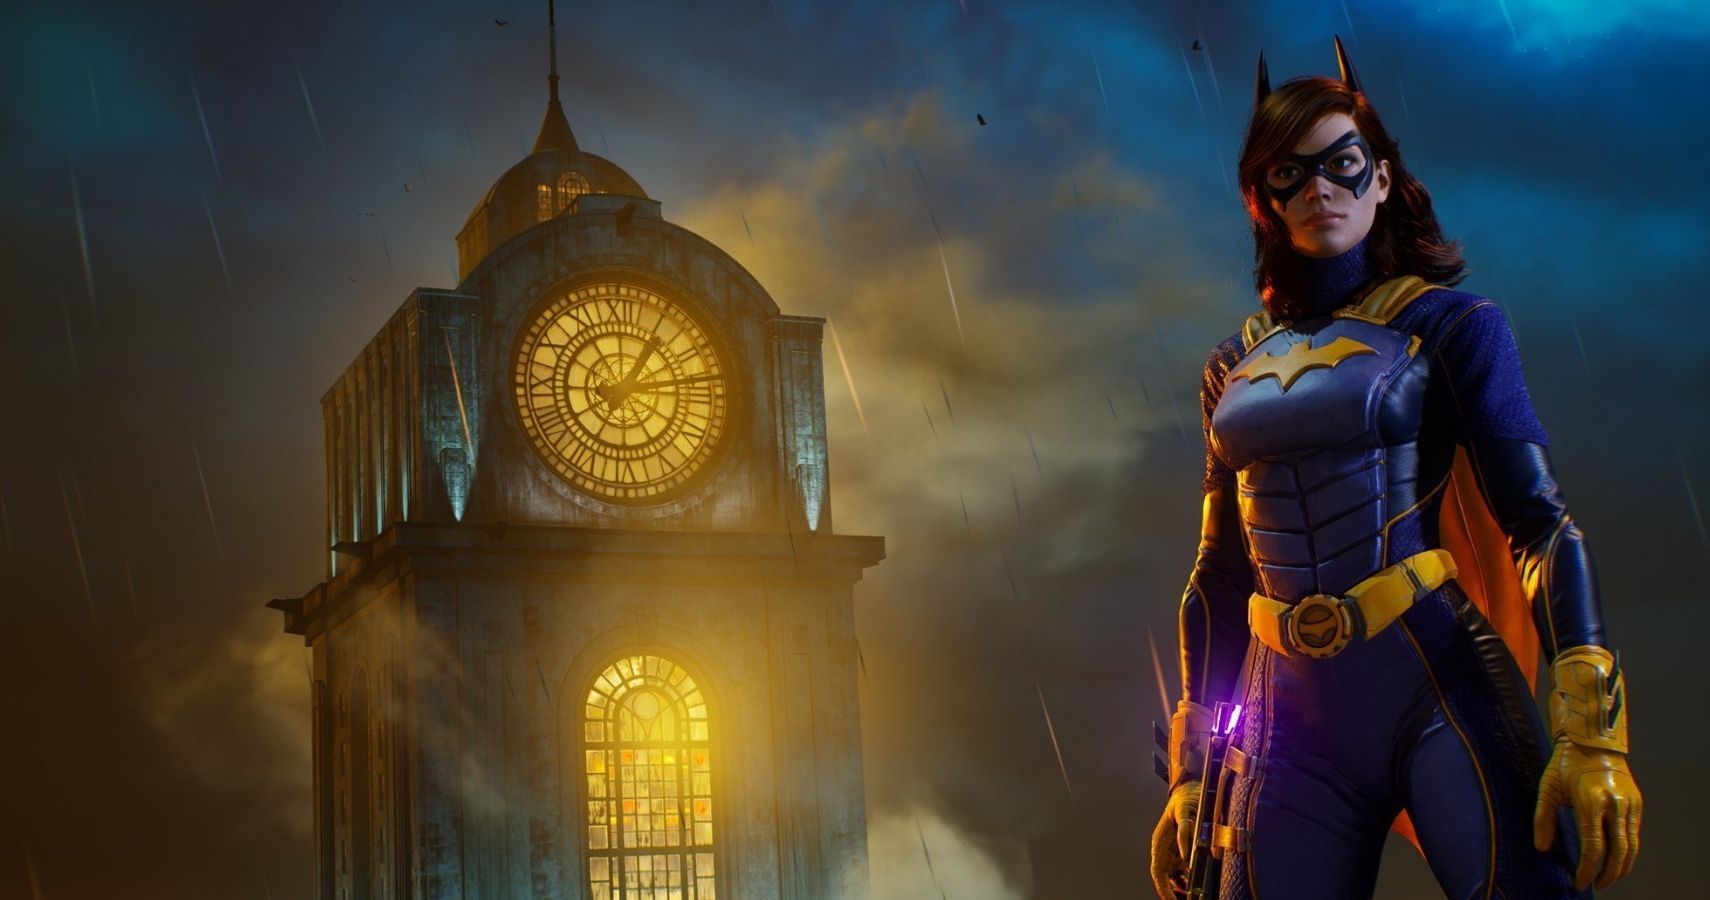 Batgirl stands in a black and yellow superhero costume. She is standing outside in a city, on a misty night.